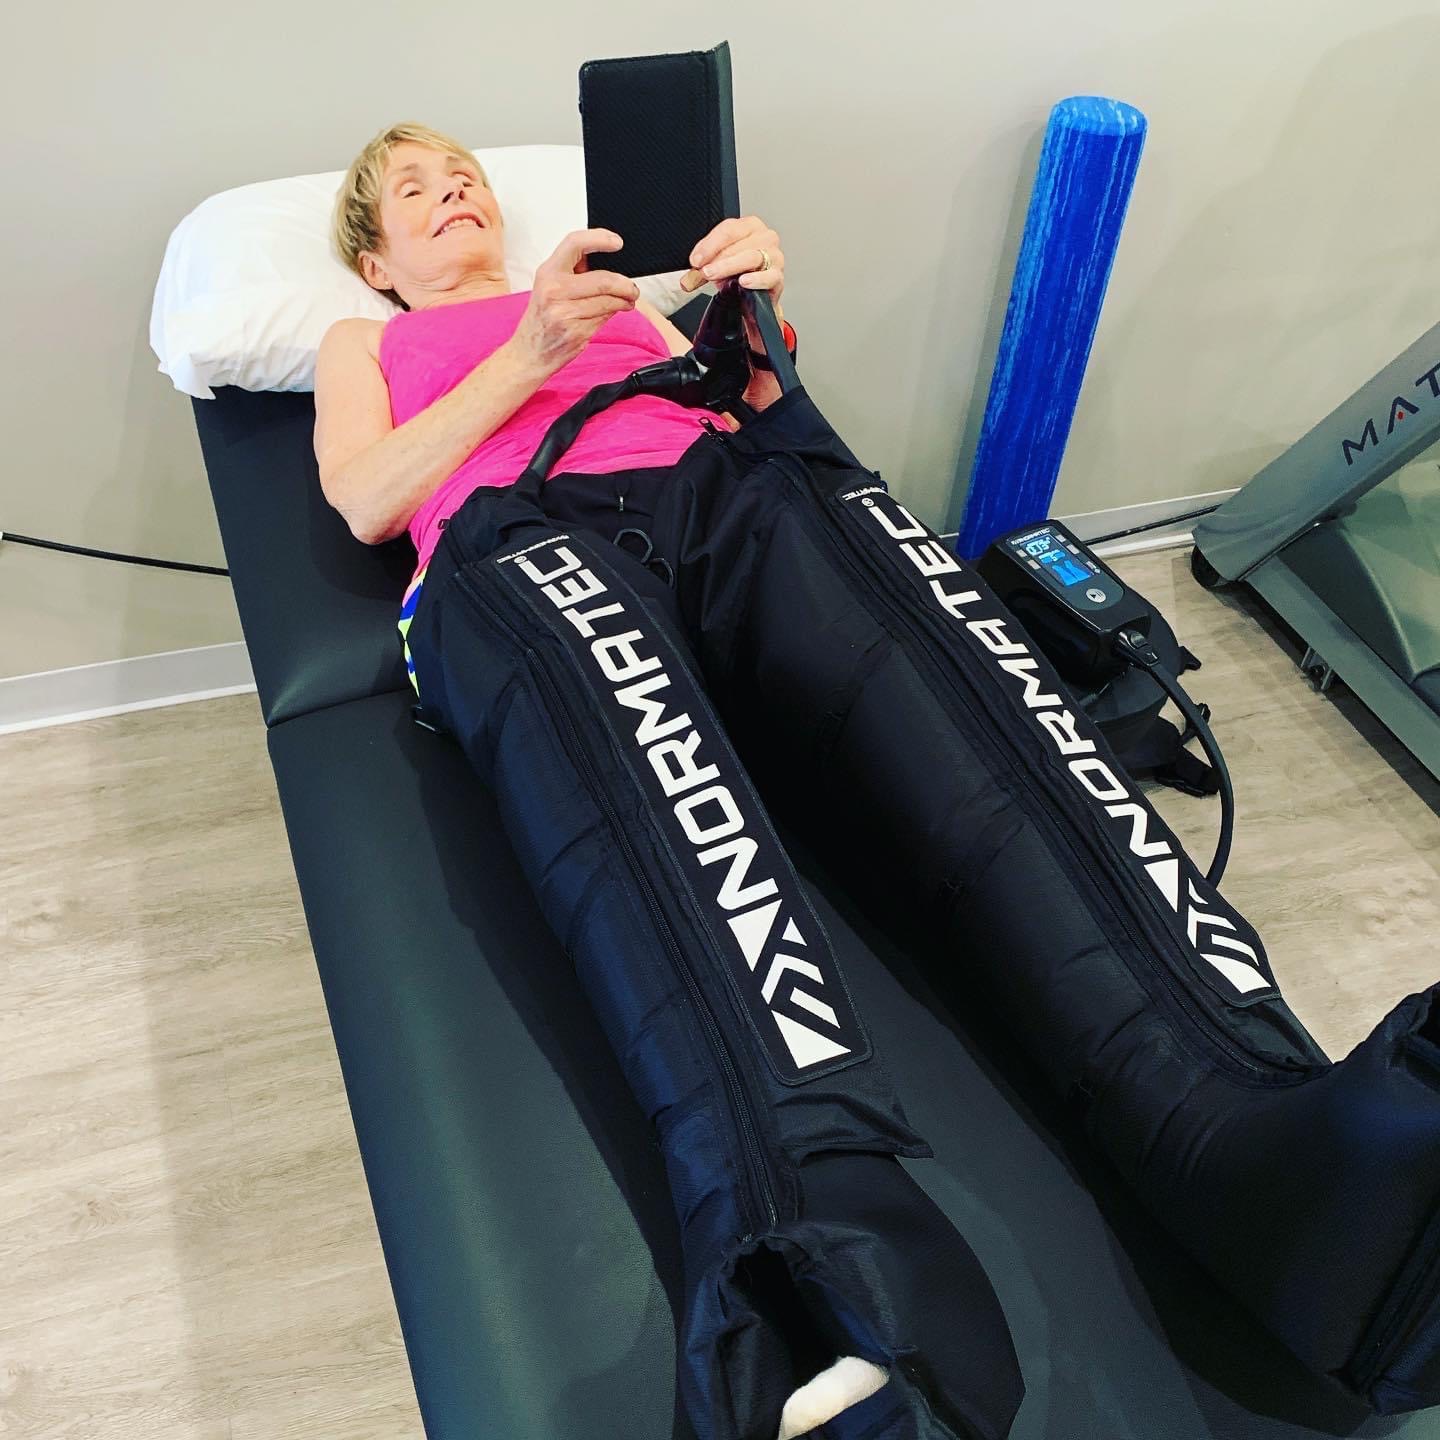 A patient finds relief using the Normatech technique to treat her condition at PRIME Physical Therapy.